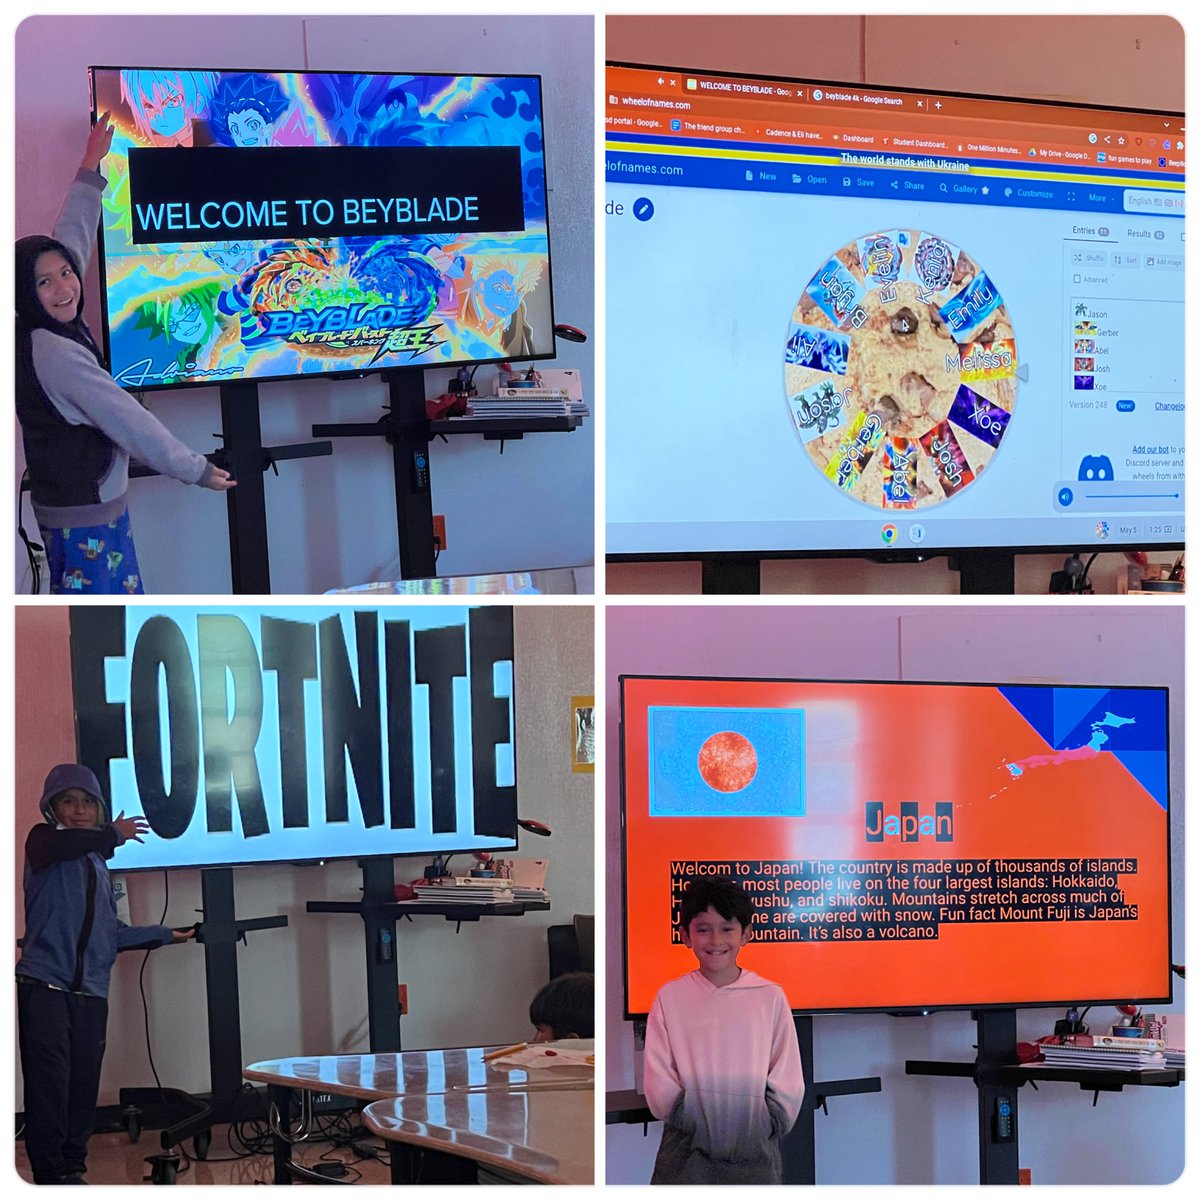 @OdomEagles growing their presentation skills with topics of interest. Tactics to keep the audience engaged: #HiddenObjects within the slides & #Questions at the end of the presentation using #WheelOfNames